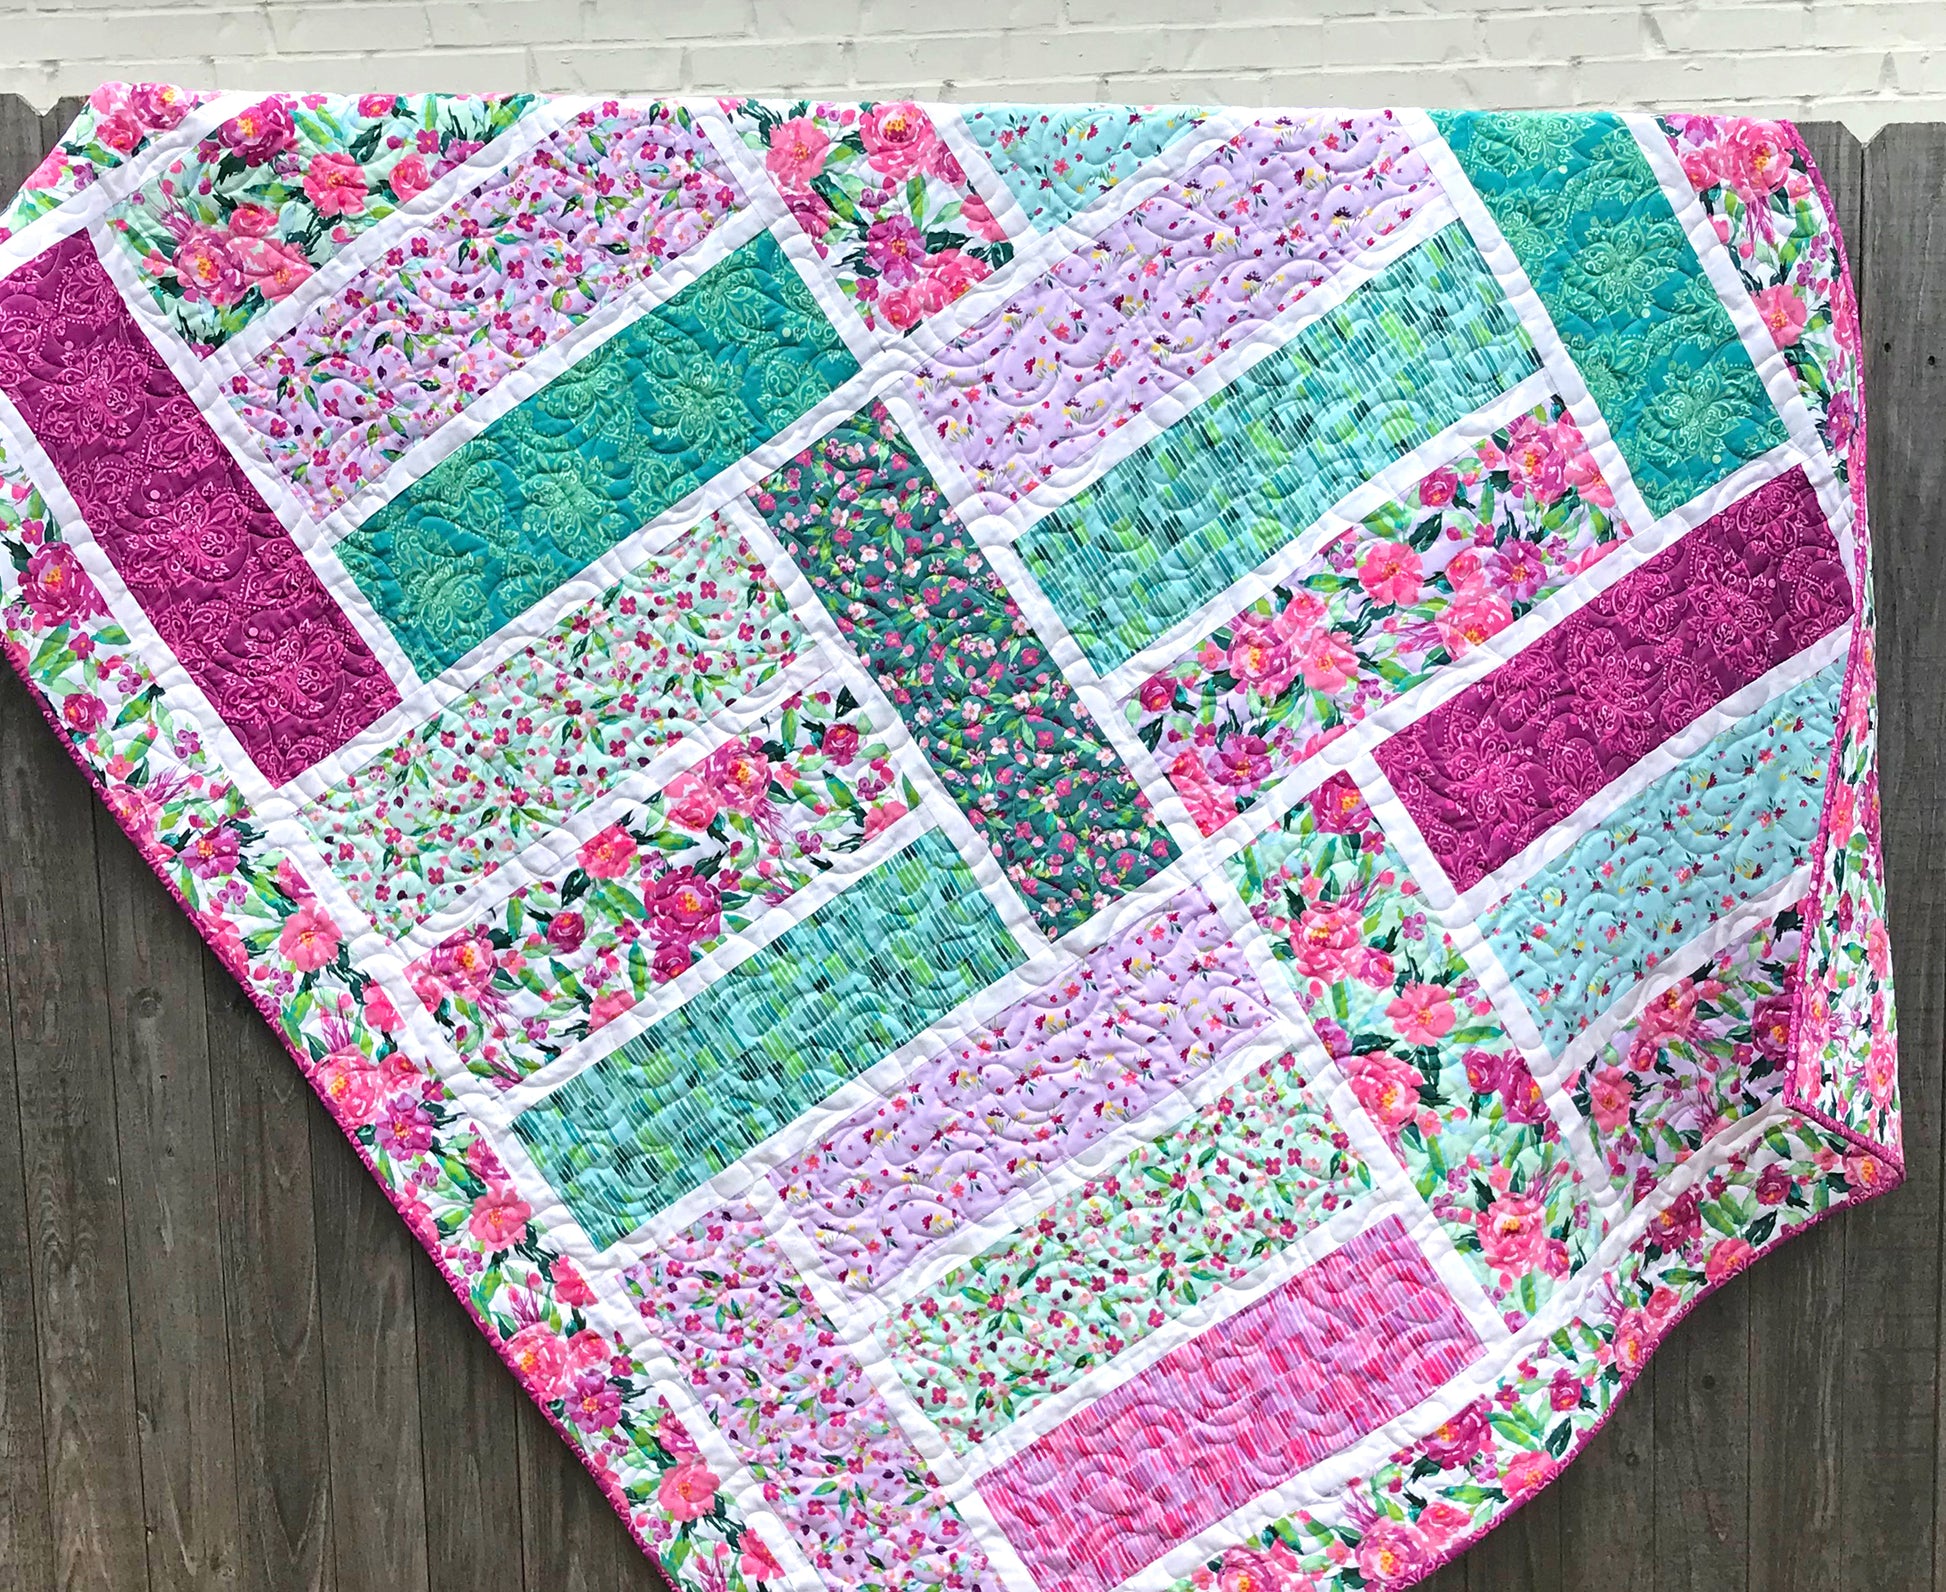 Shop online for Quilting Patterns